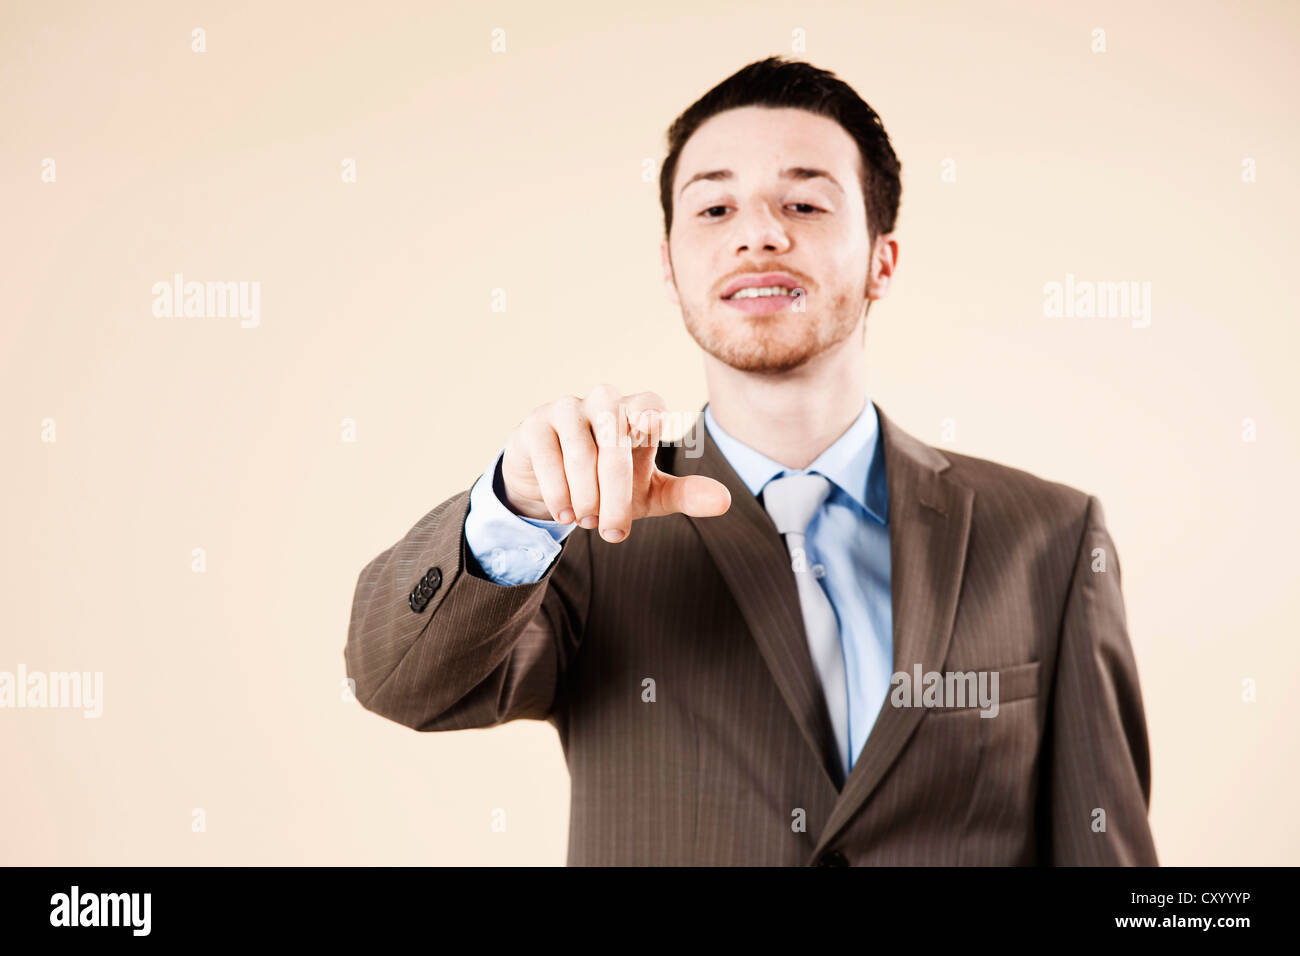 Businessman typing on an imaginary touchscreen Stock Photo